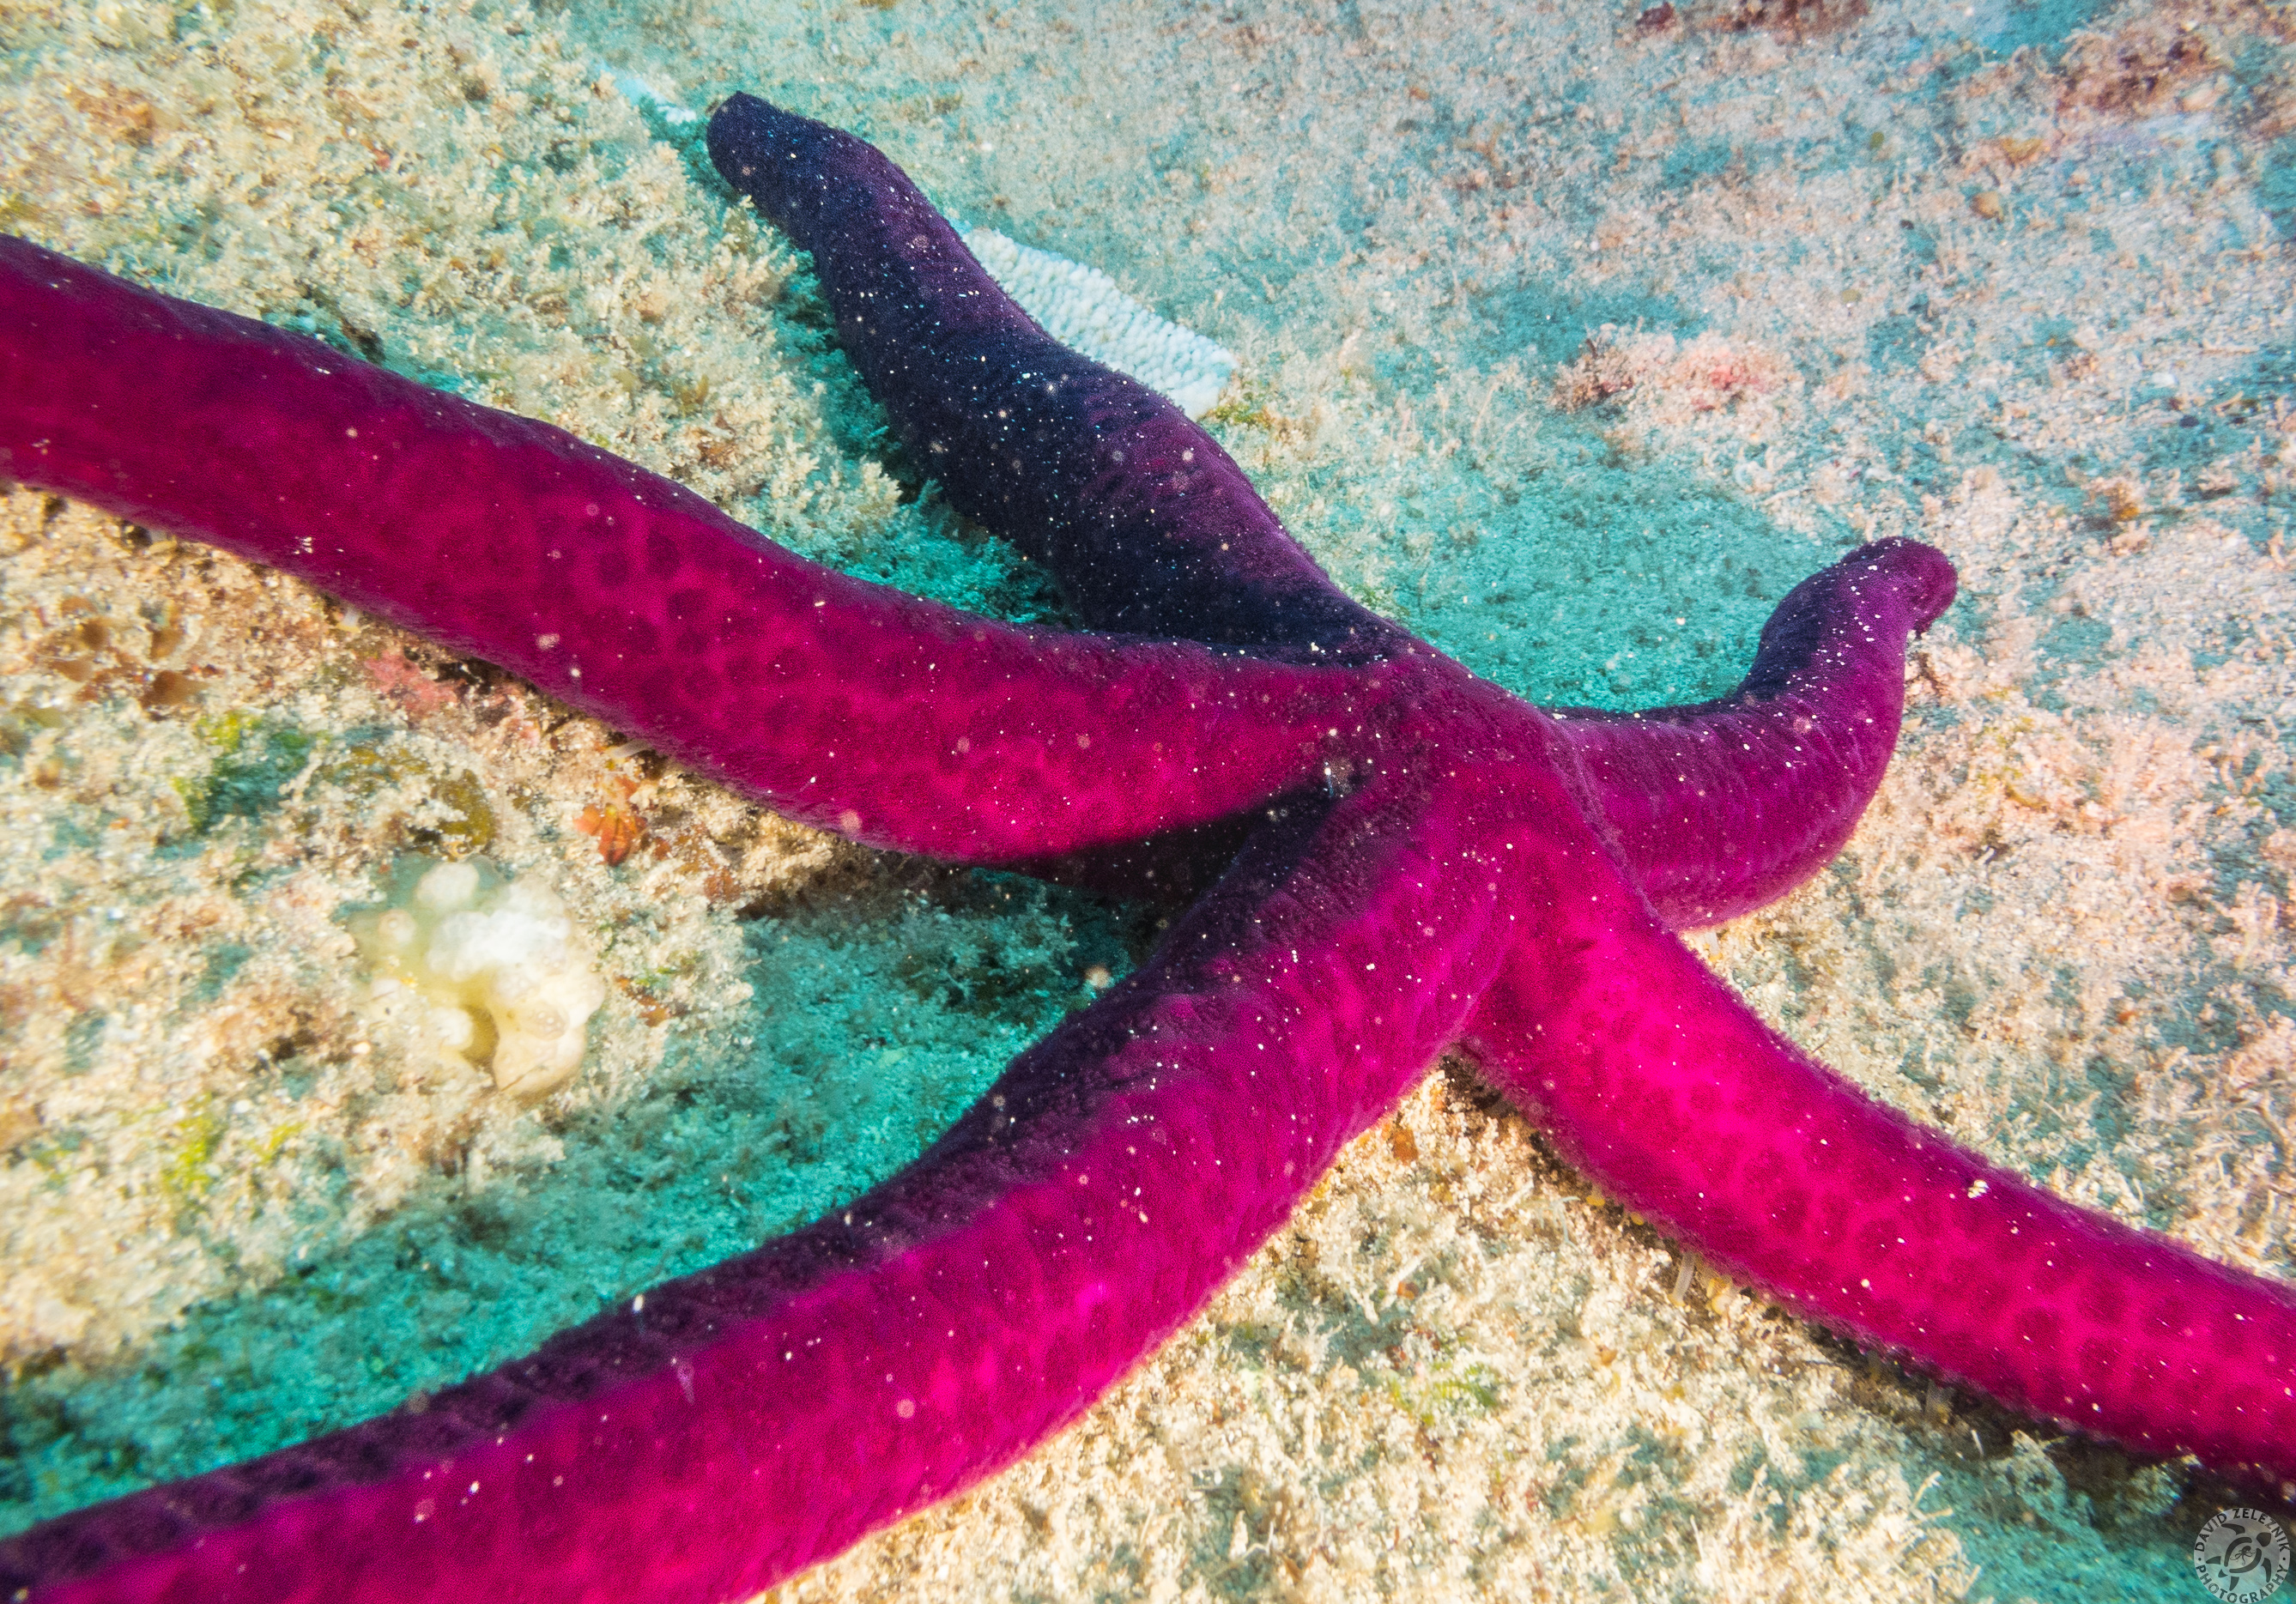 Purple Velvet Stars used to only be found at significant depths, but they are becoming more common on the shallower reefs of Hawaii